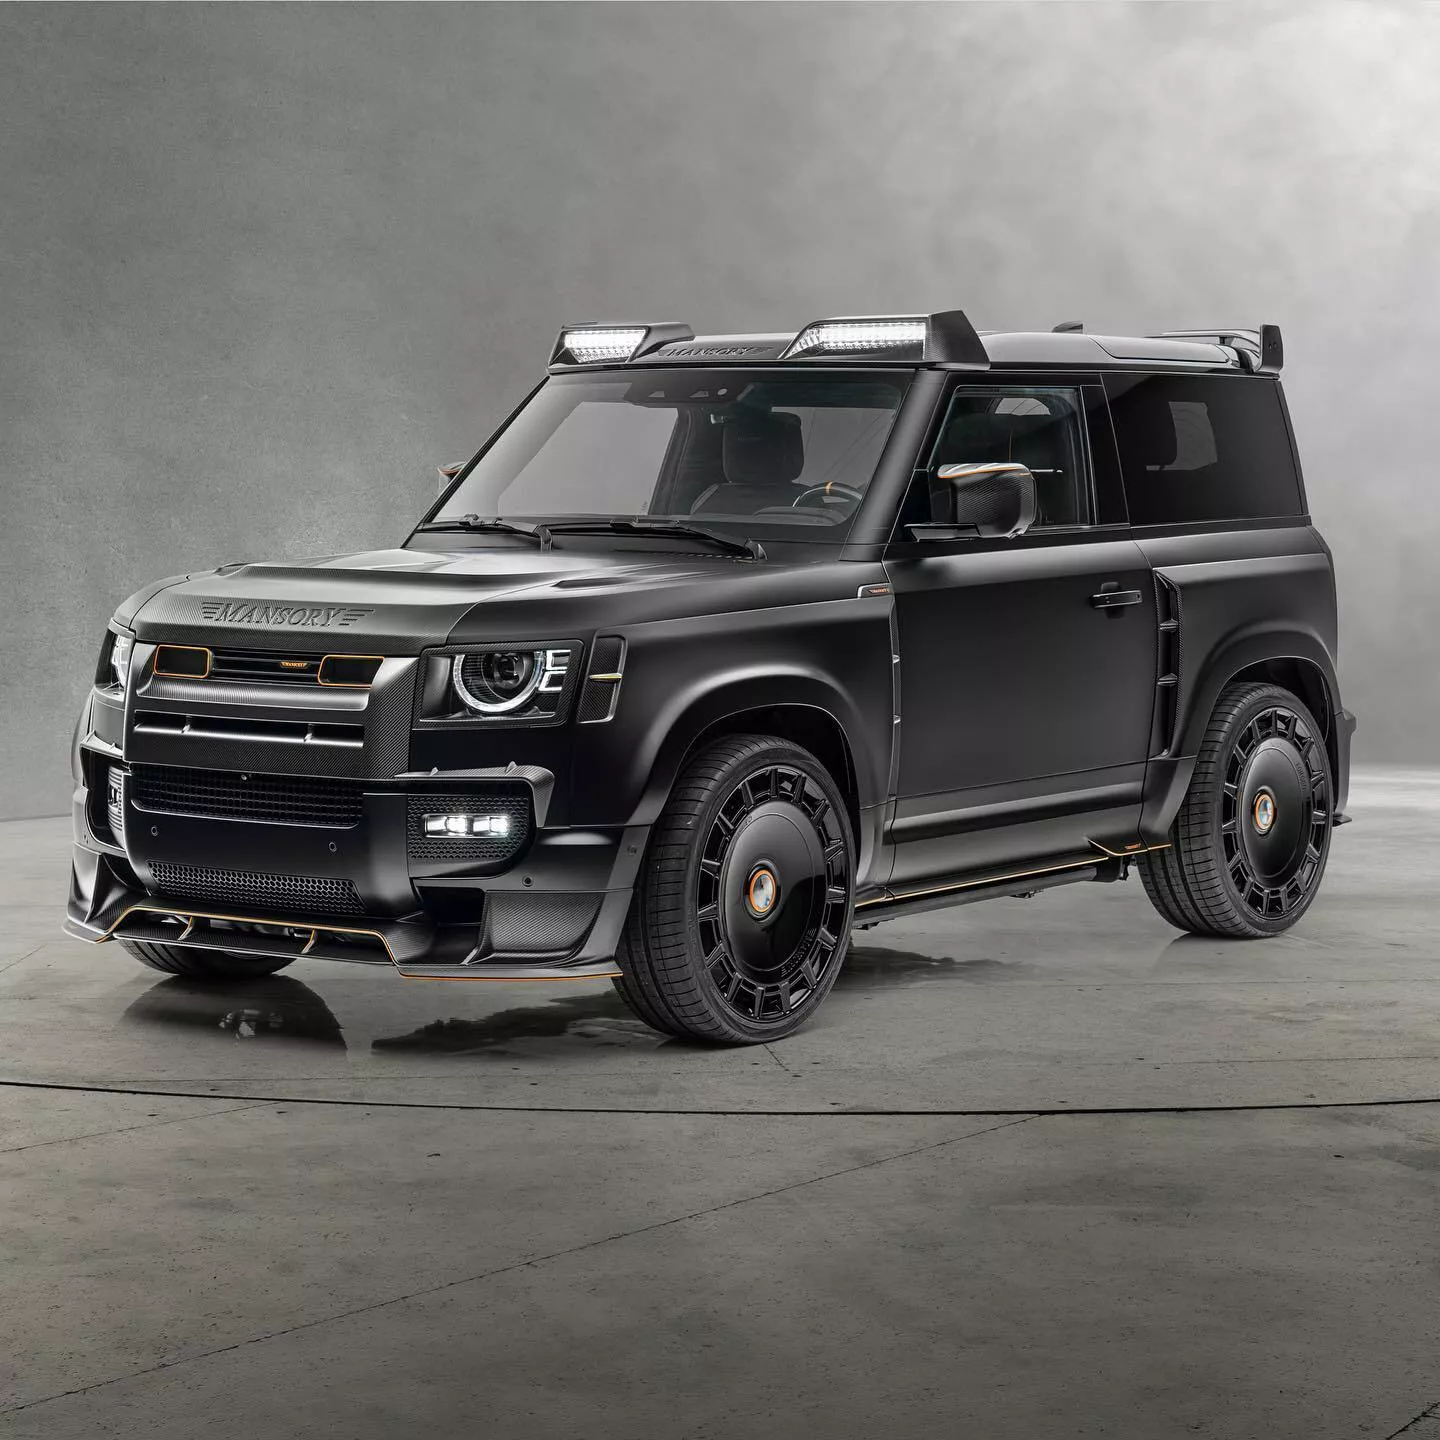 Check out the cool Mansory modified Land Rover Defender mansory-land-rover-defender-3.webp